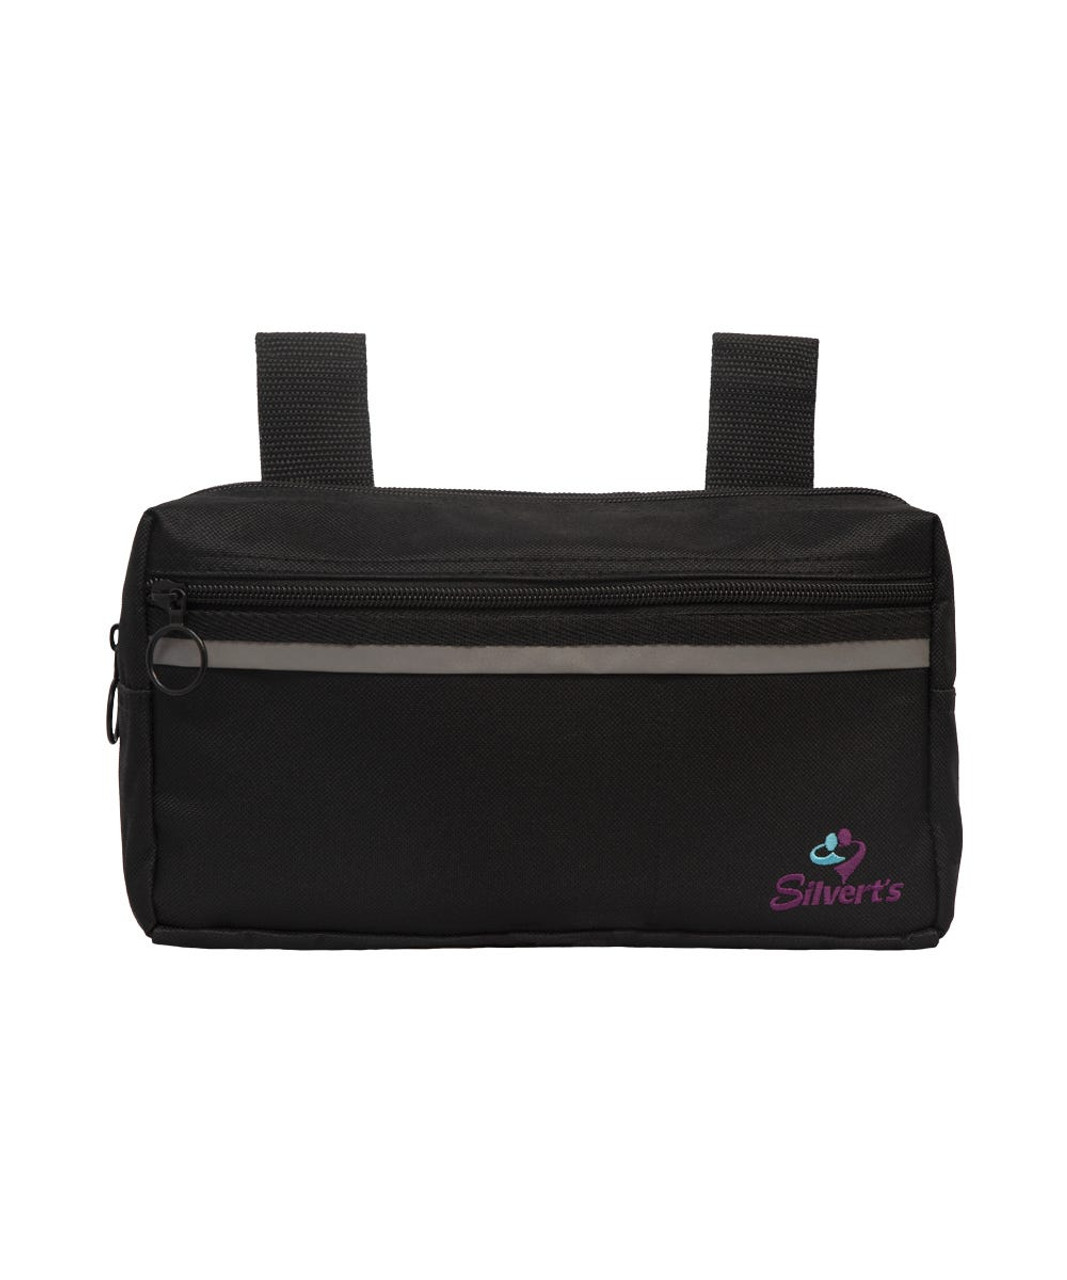 Silverts SV30150 Unisex Walker / Wheelchair Bags/ Bedside Rail Pouch Black, Size=OS, SV30150-SV2-OS